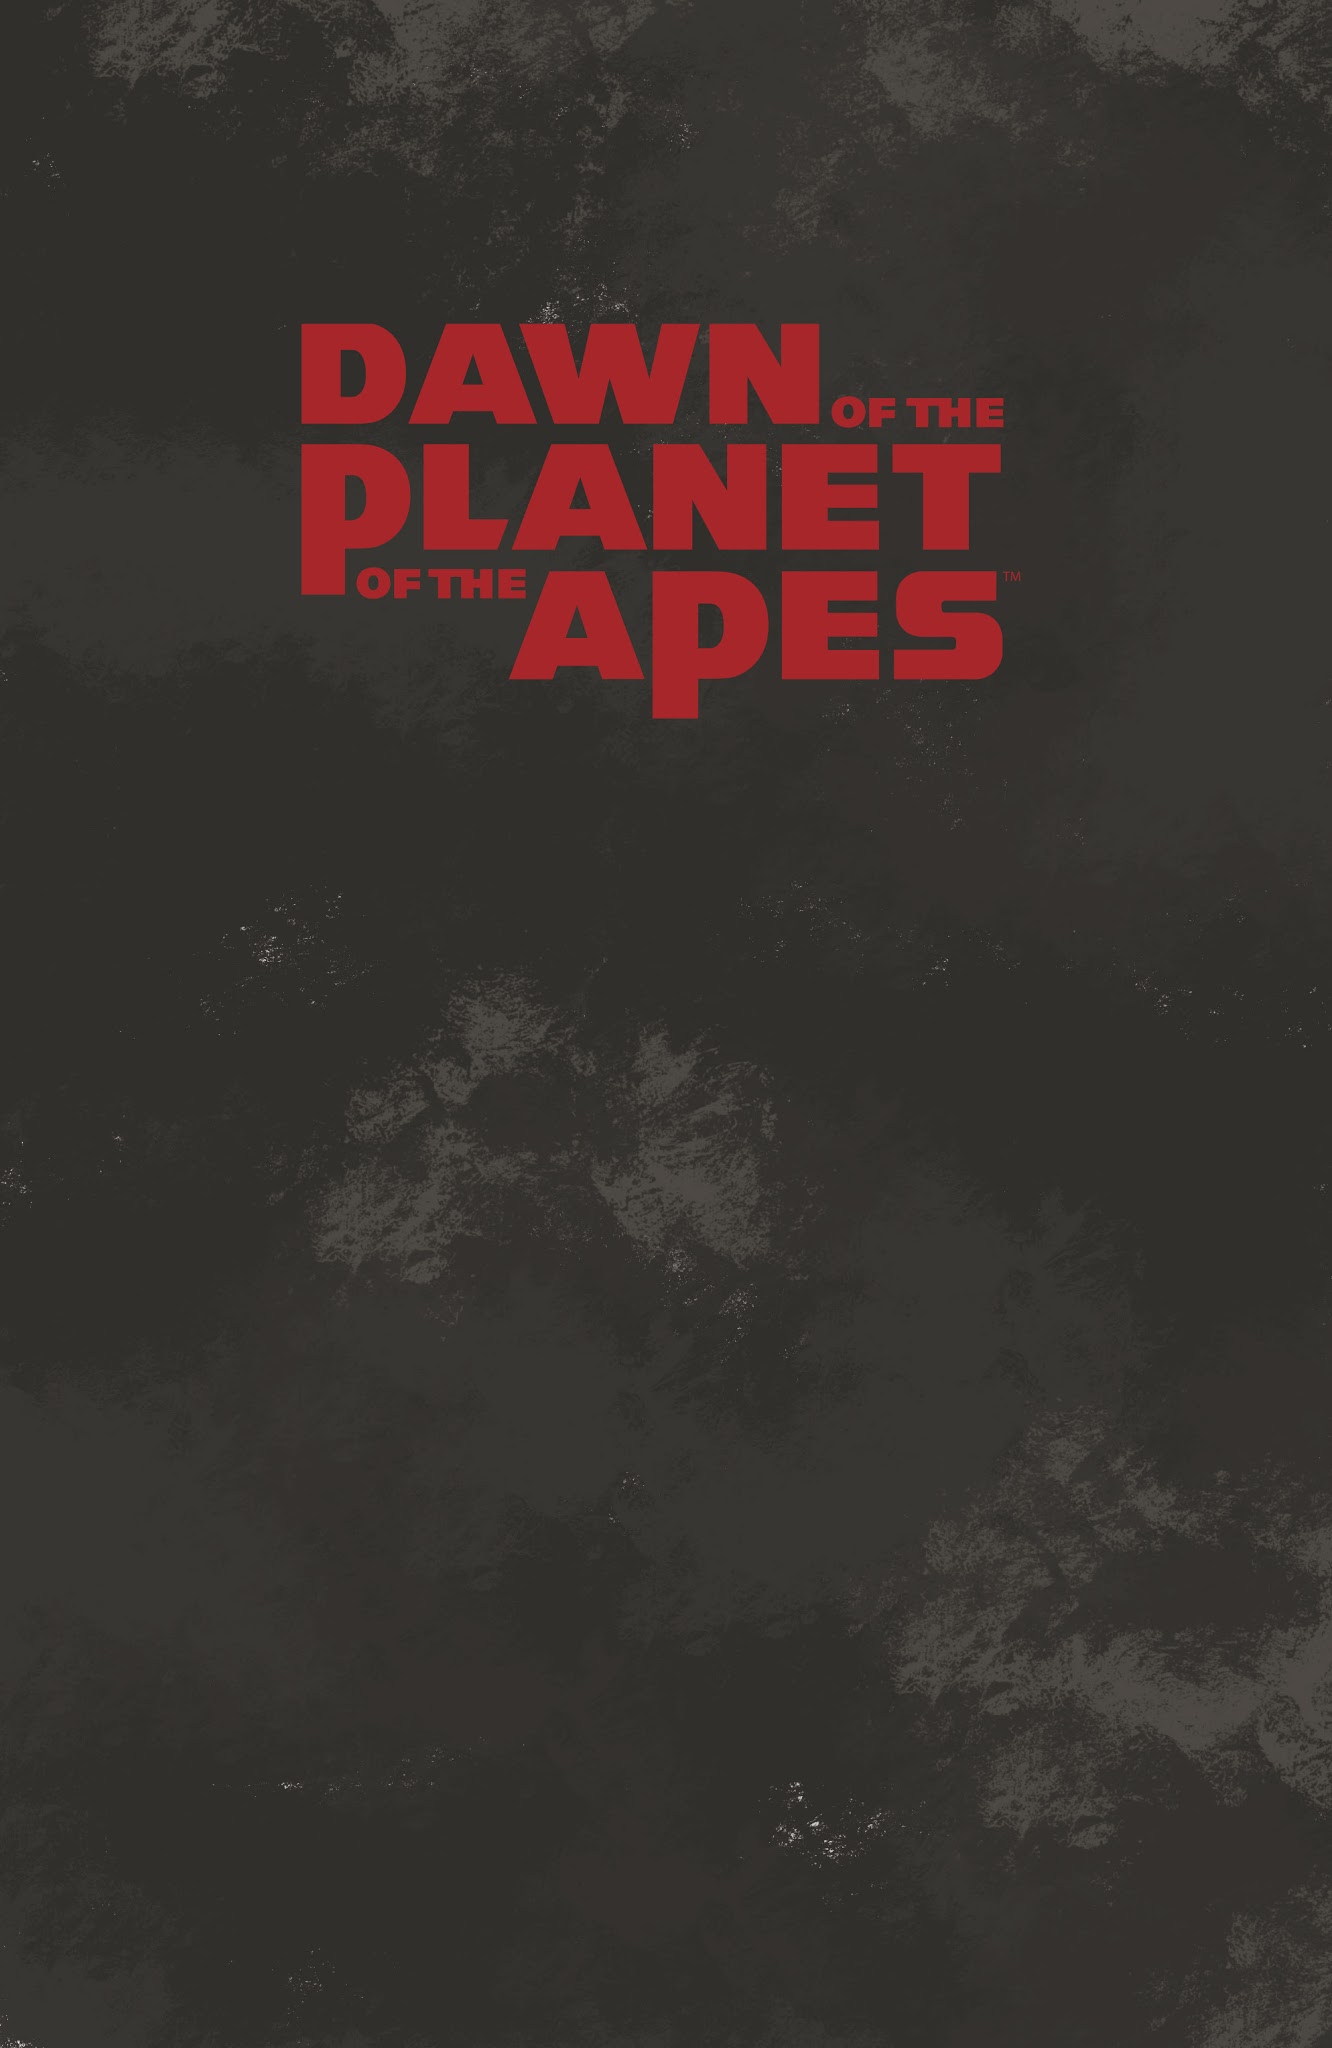 Read online Dawn of the Planet of the Apes comic -  Issue # TPB - 2